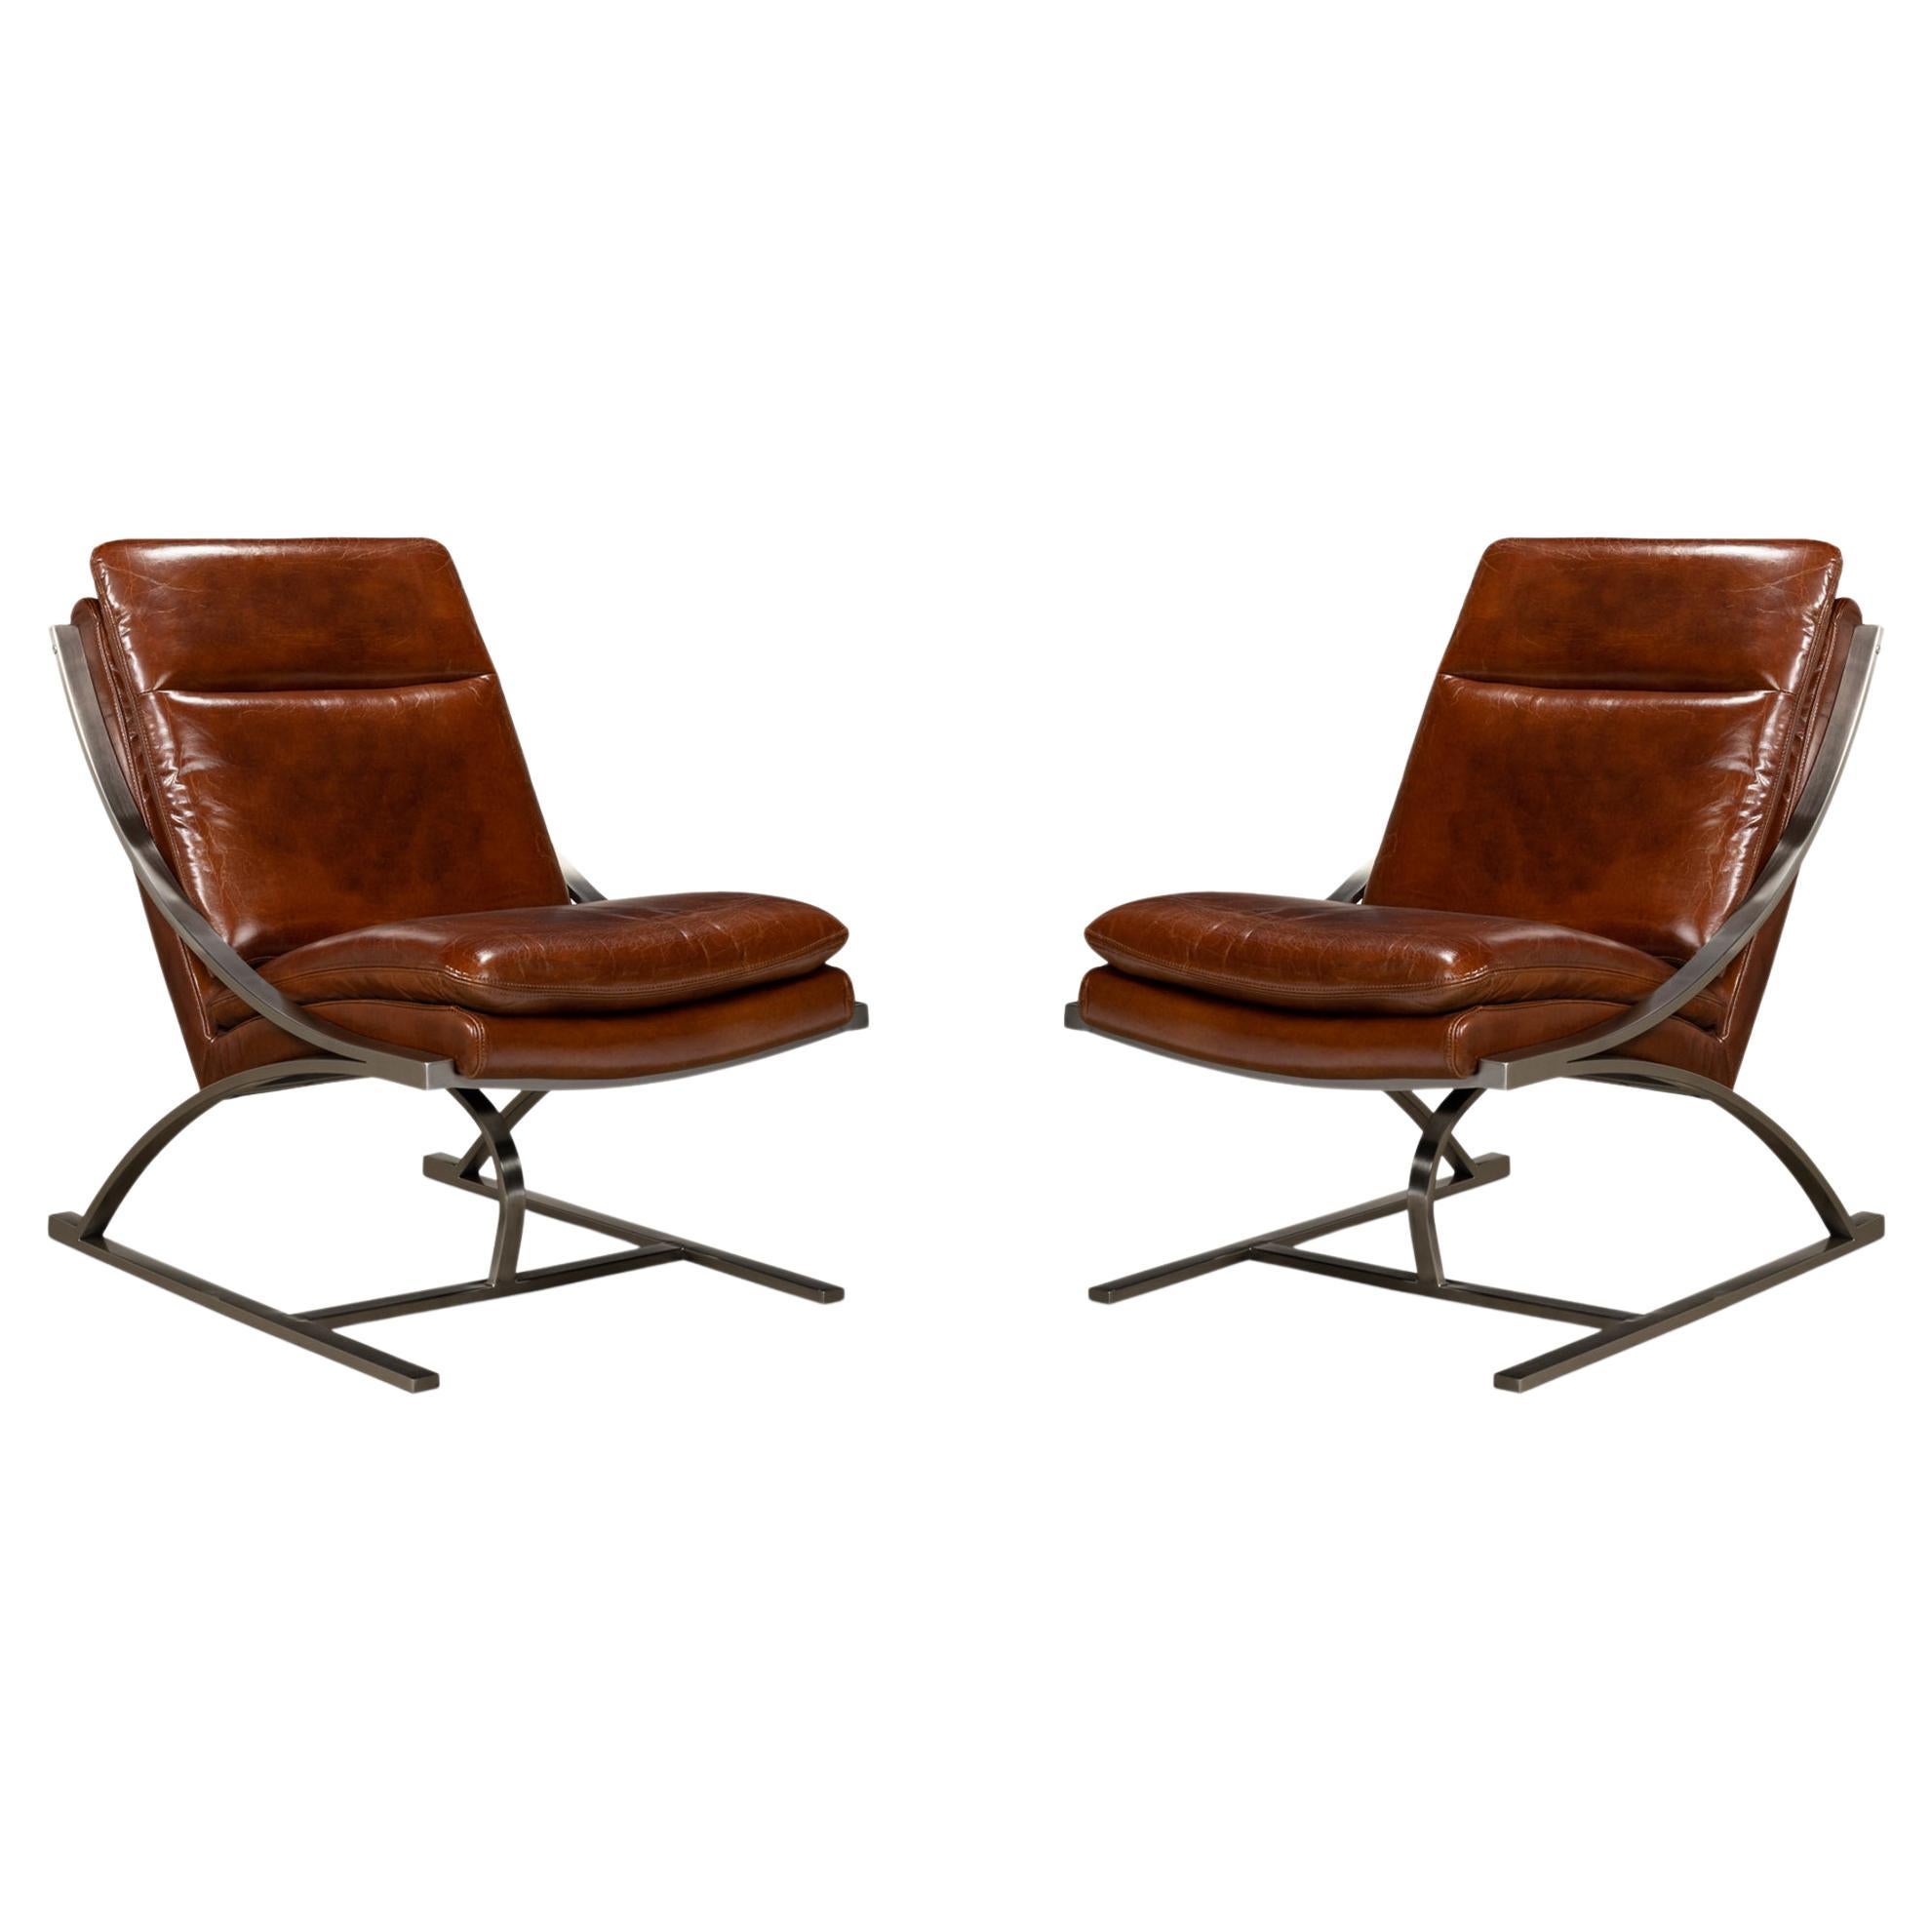 Pair of Modern Stainless Steel and Brown Leather Chairs For Sale